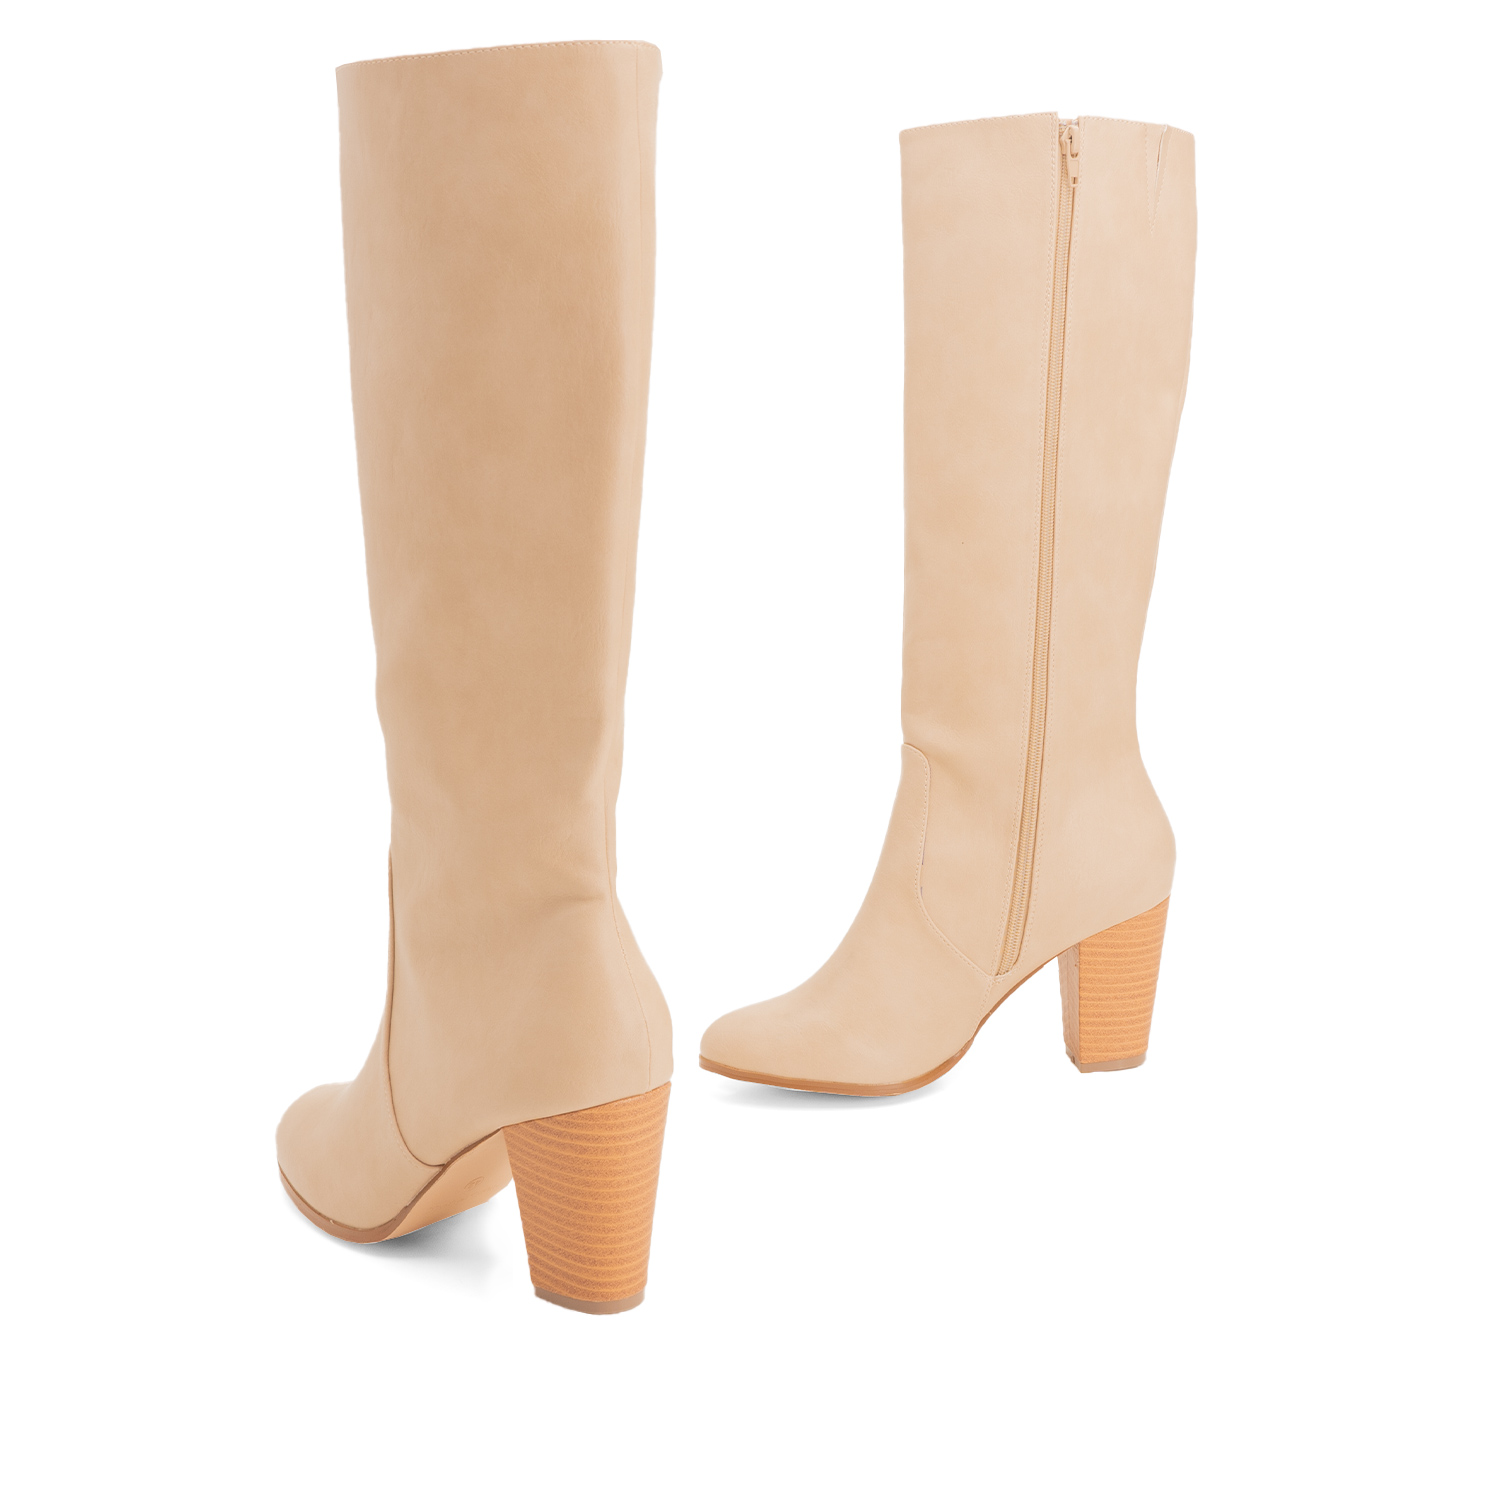 Heled mid-calf boots in off-white faux leather 